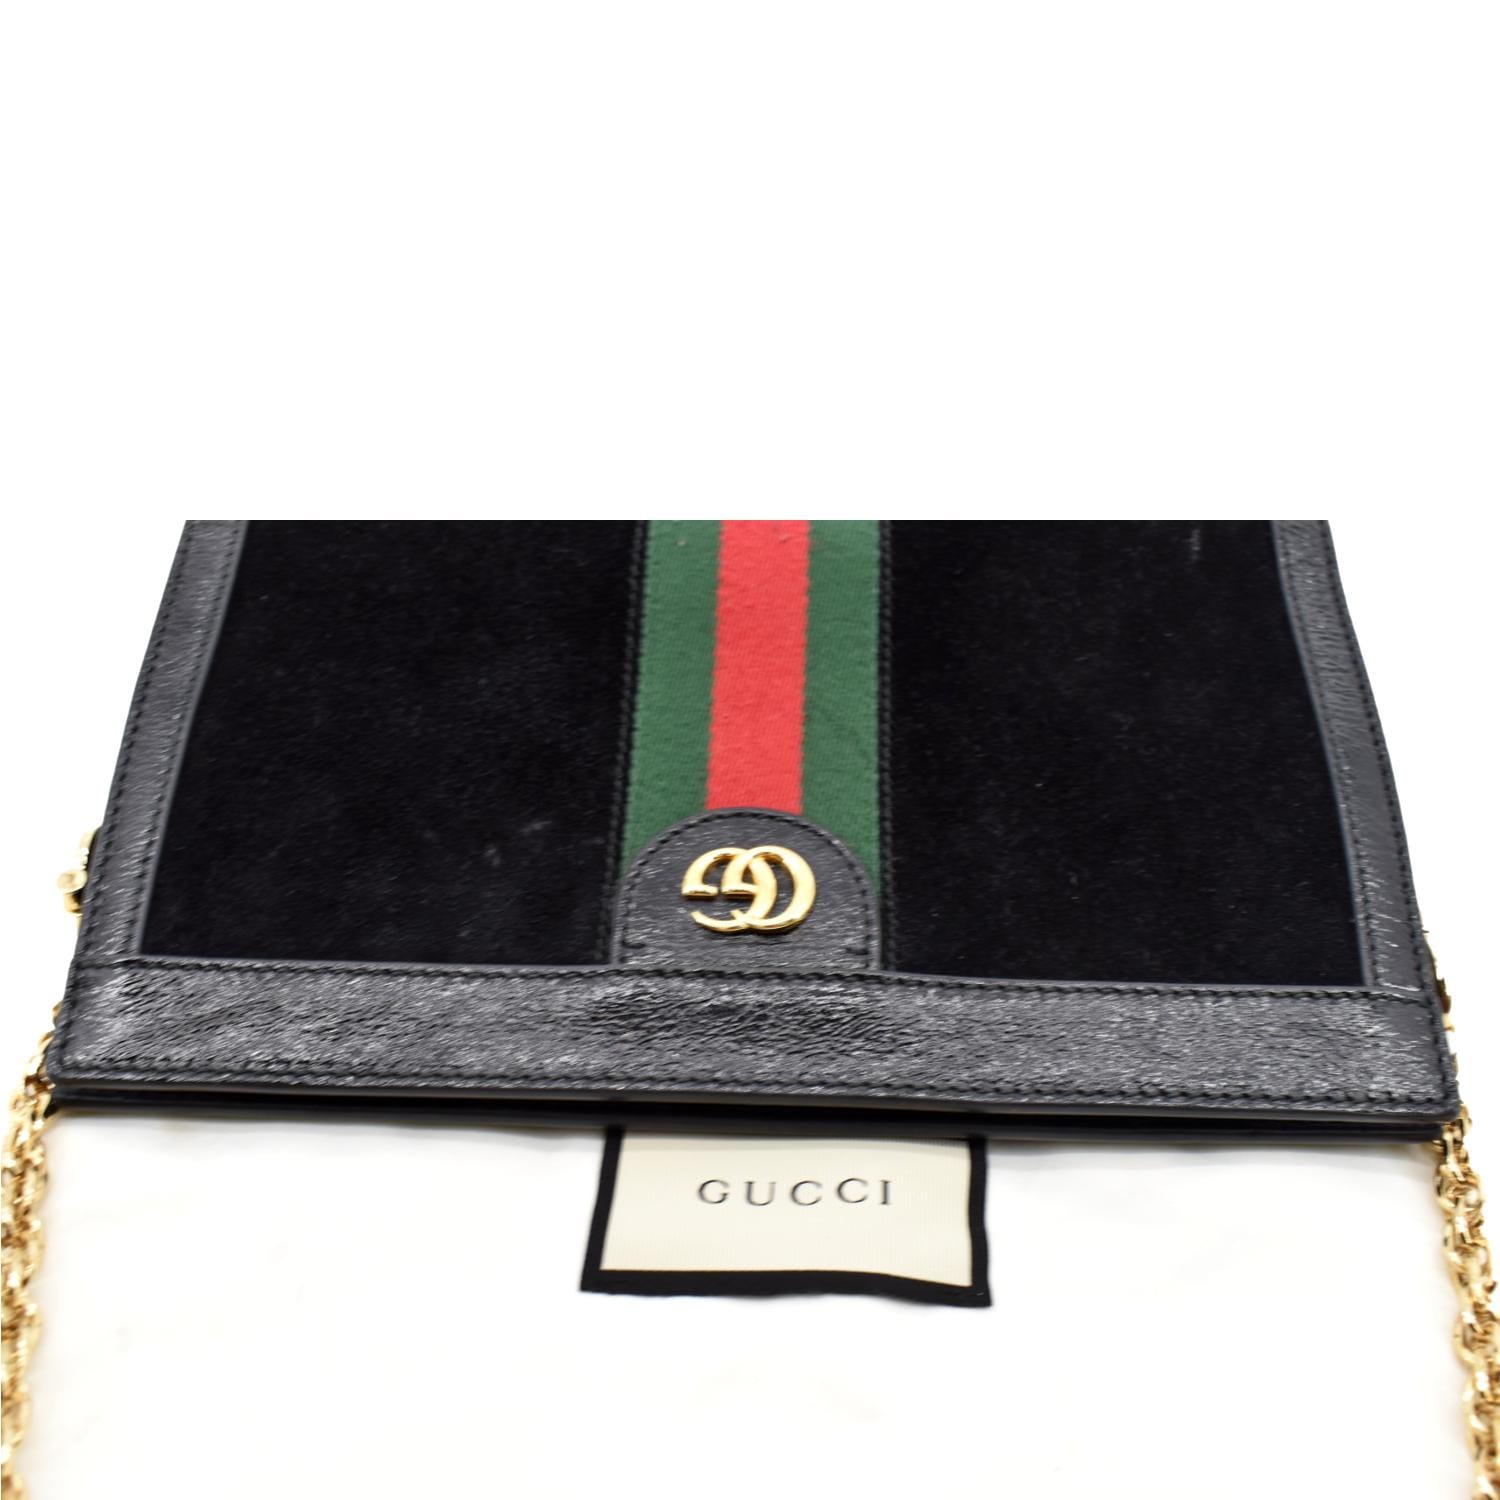 GUCCI Ophidia Ophidia gg small shoulder bag (503877K05NG 8745)